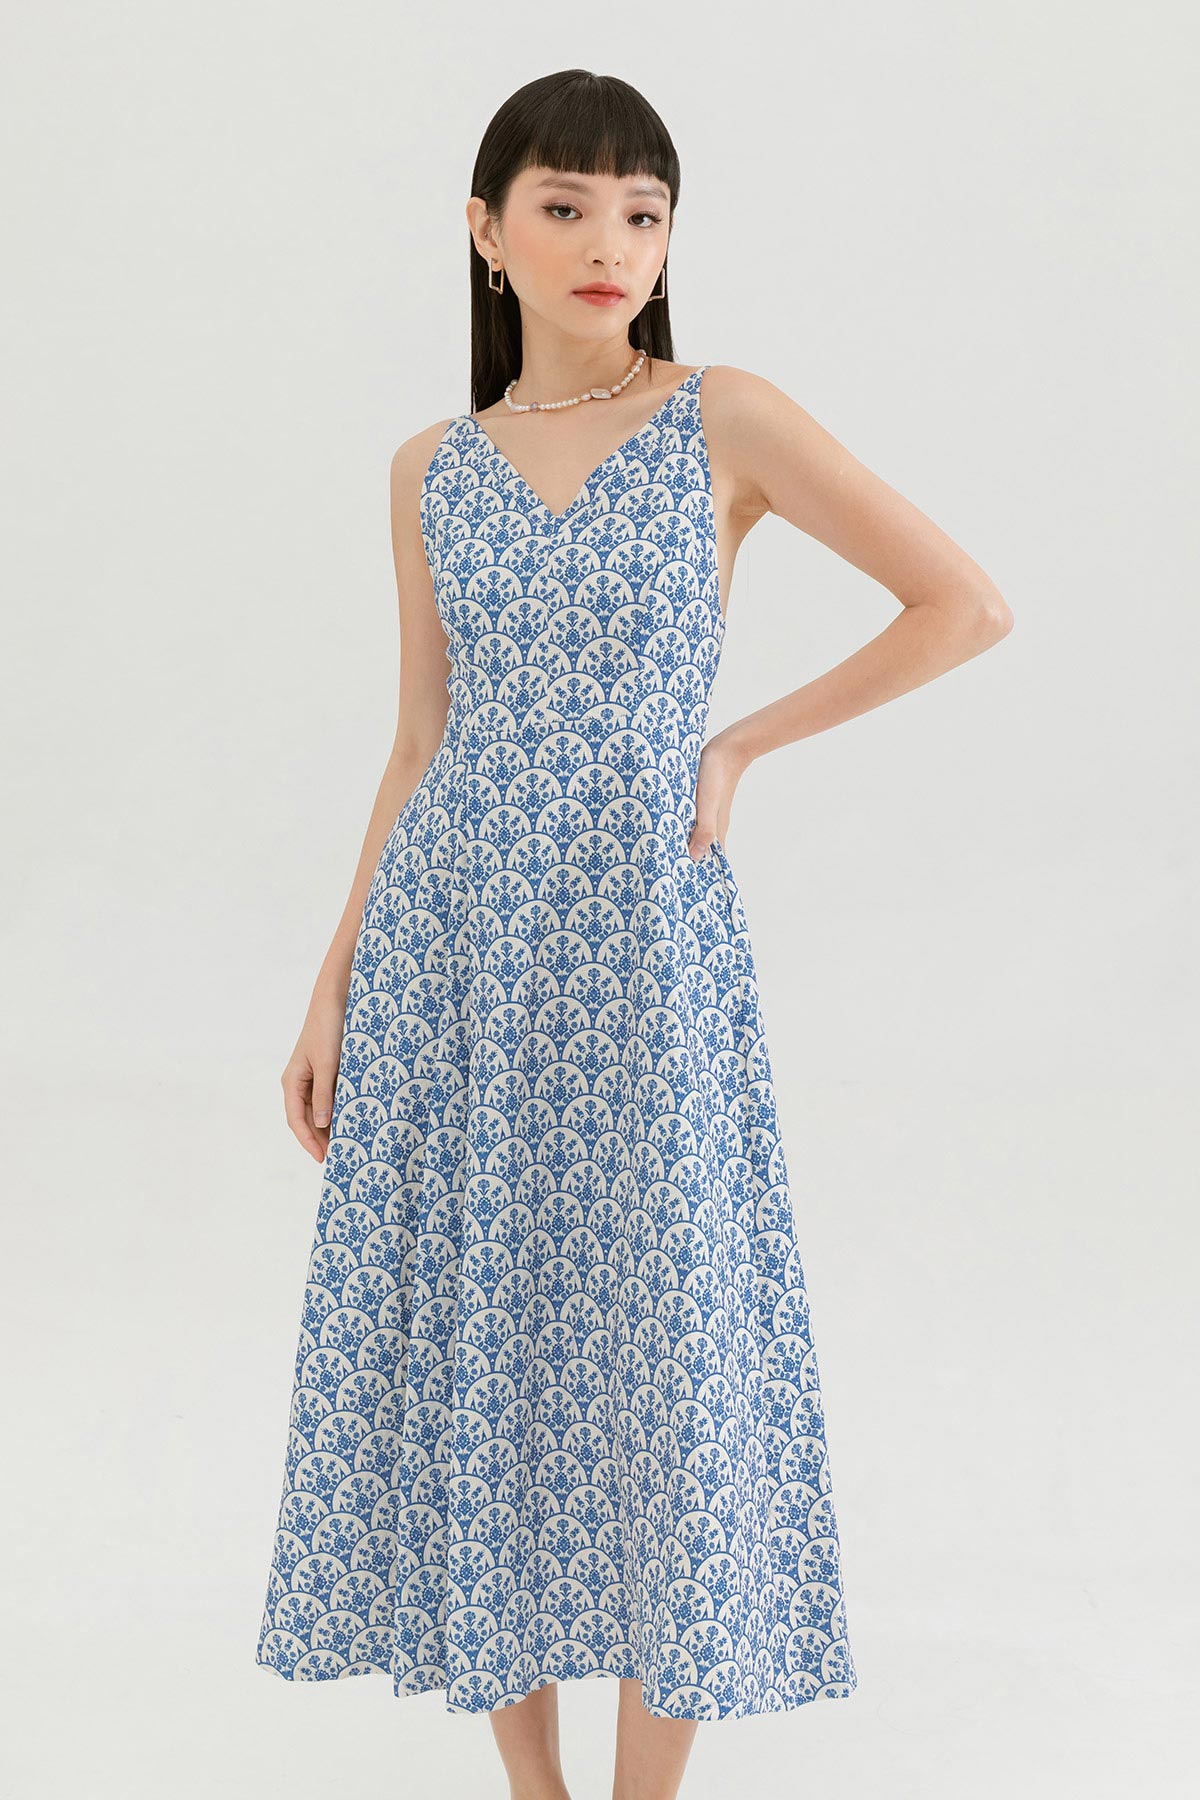 DECLAN PADDED DRESS - ROCOCO [BY MODPARADE]